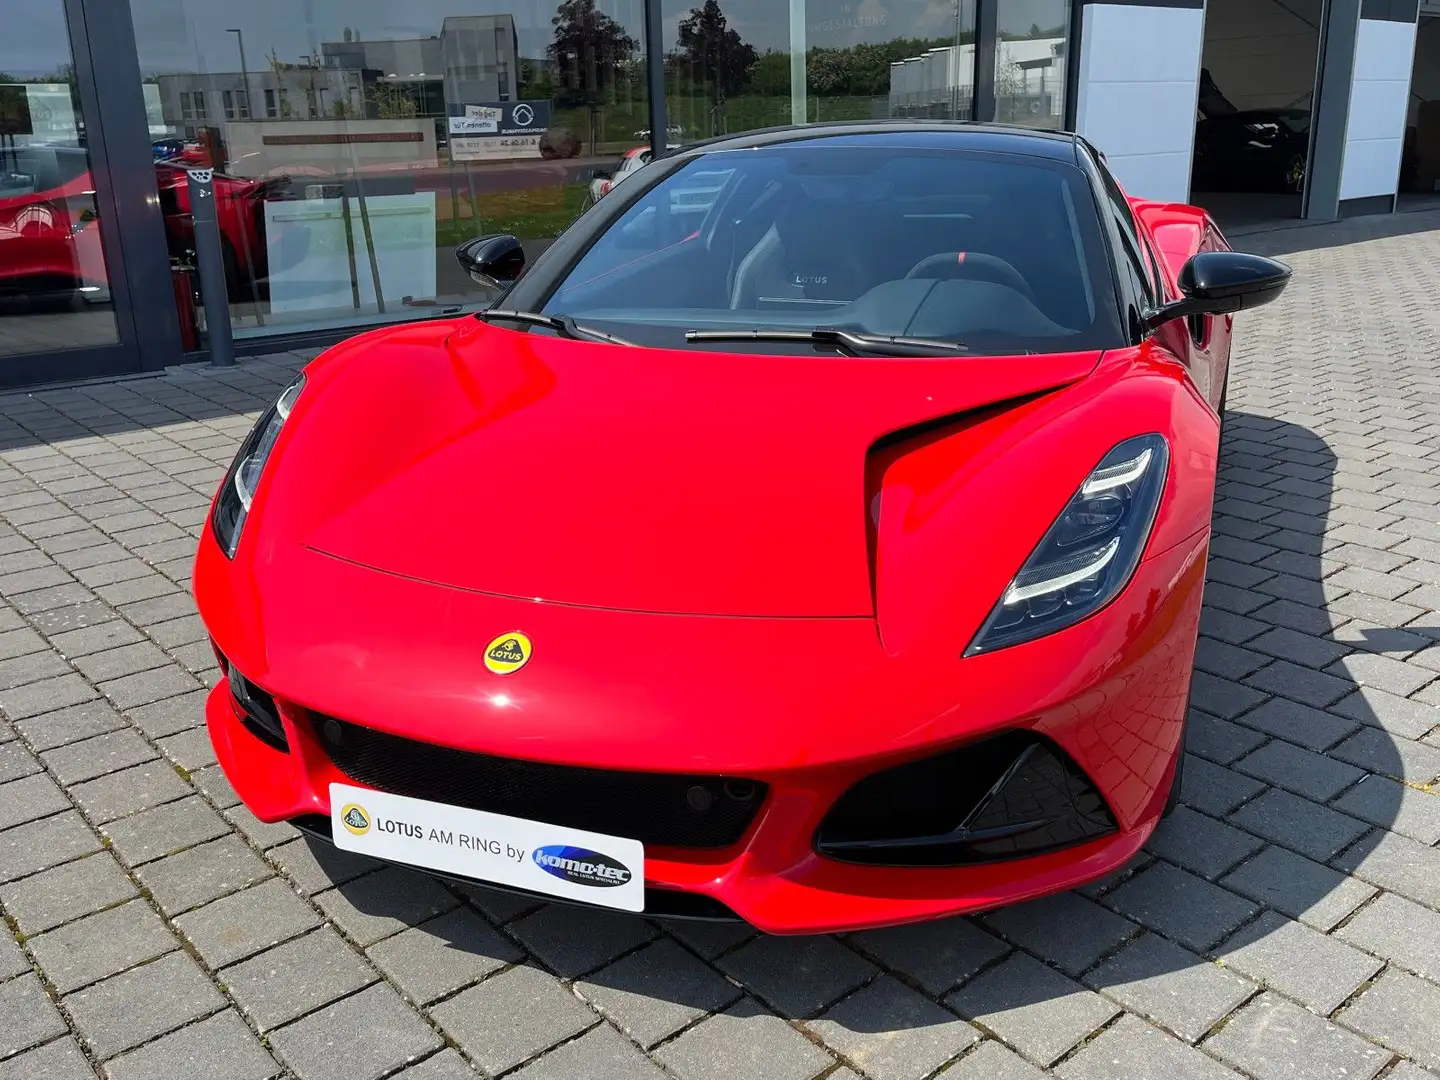 Lotus Emira I4 DCT "First Edition" by Lotus am Ring Rosso - 2